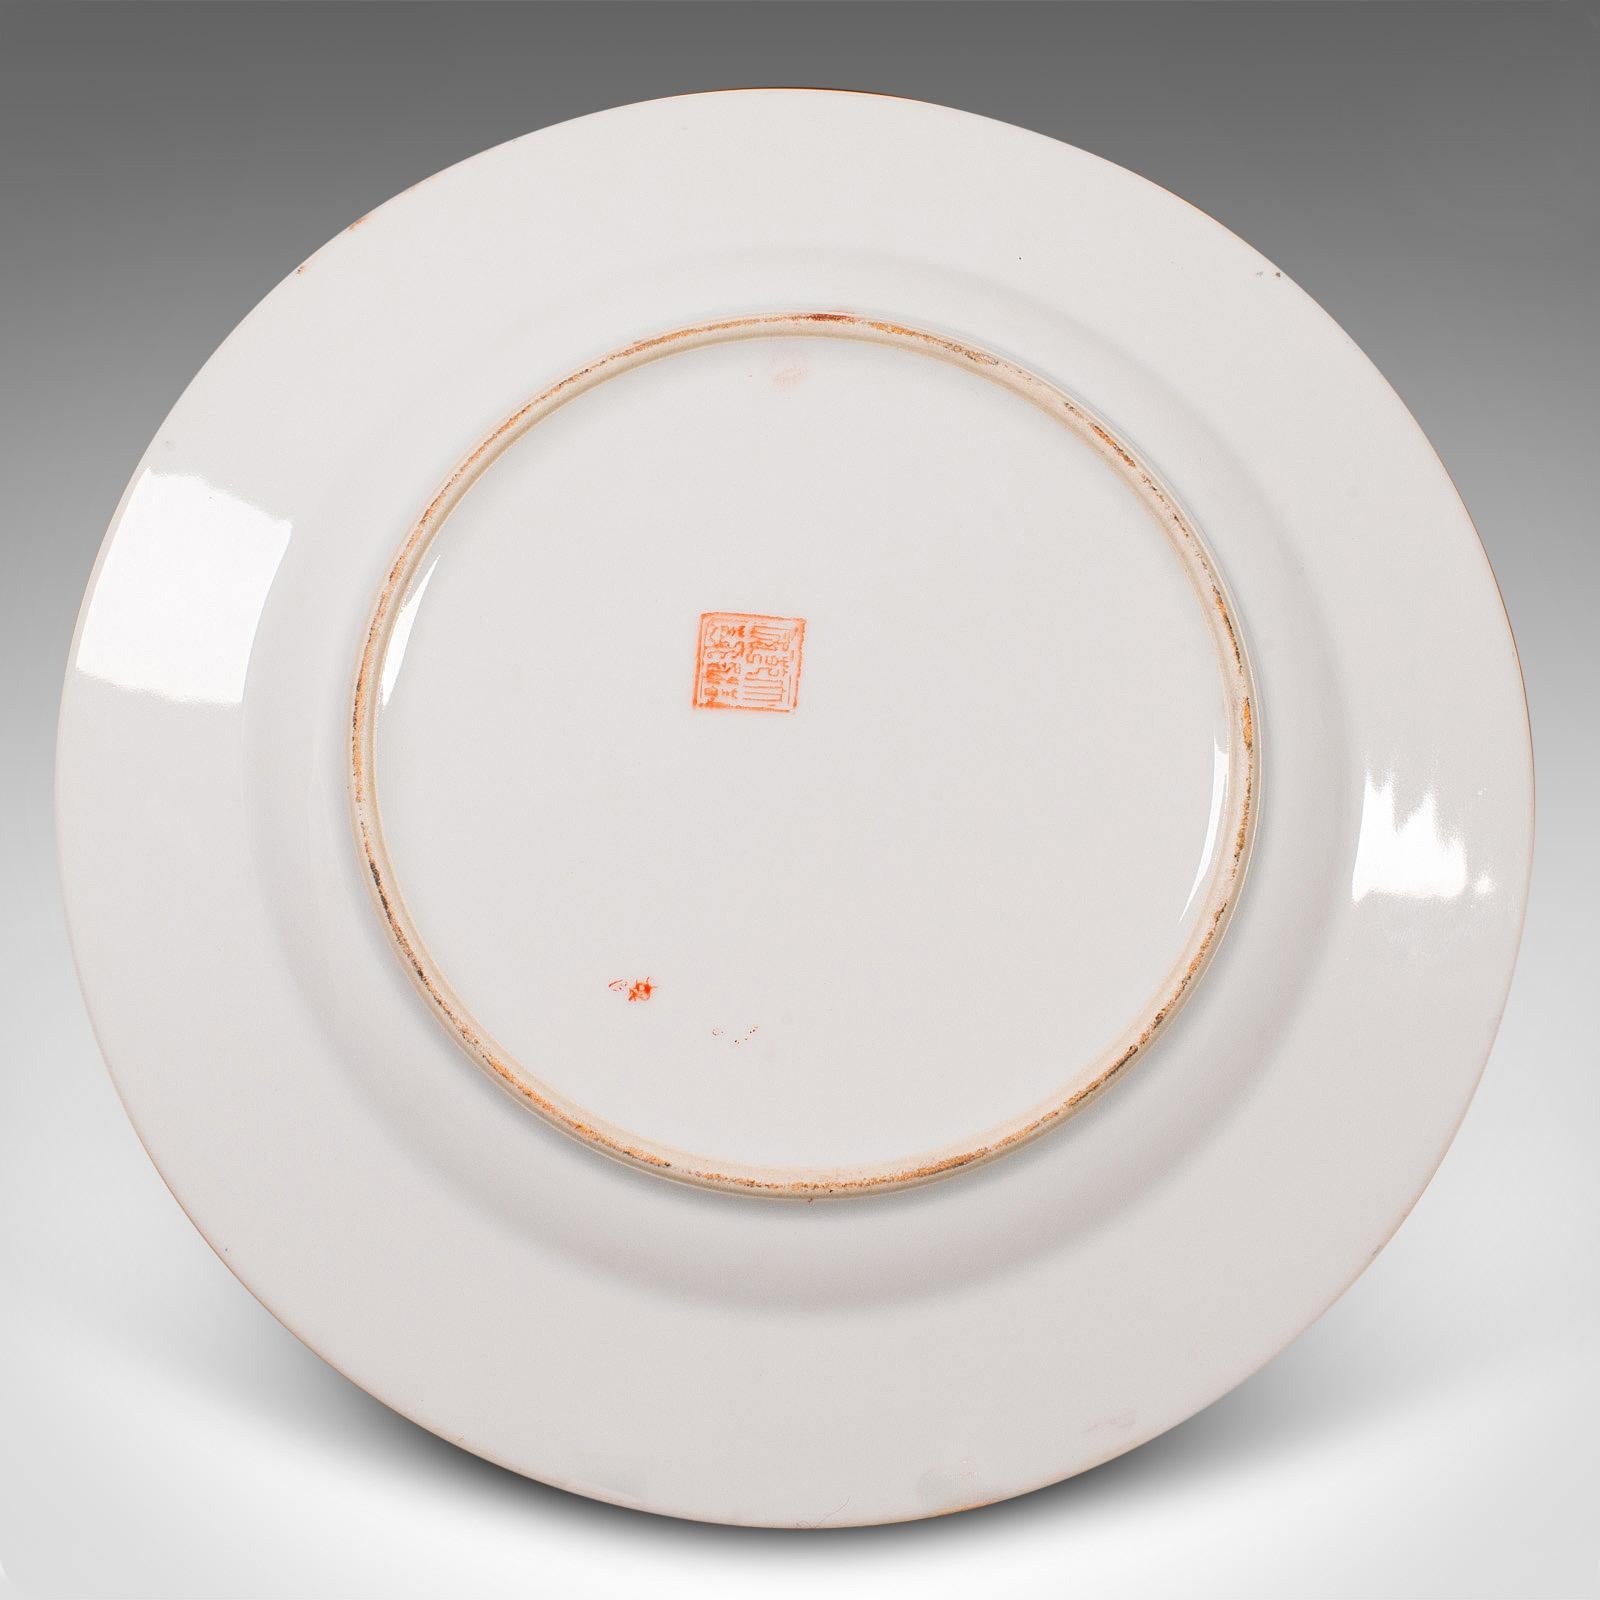 Vintage Decorative Charger, Chinese, Ceramic, Display Plate, Art Deco, C.1940 In Good Condition For Sale In Hele, Devon, GB